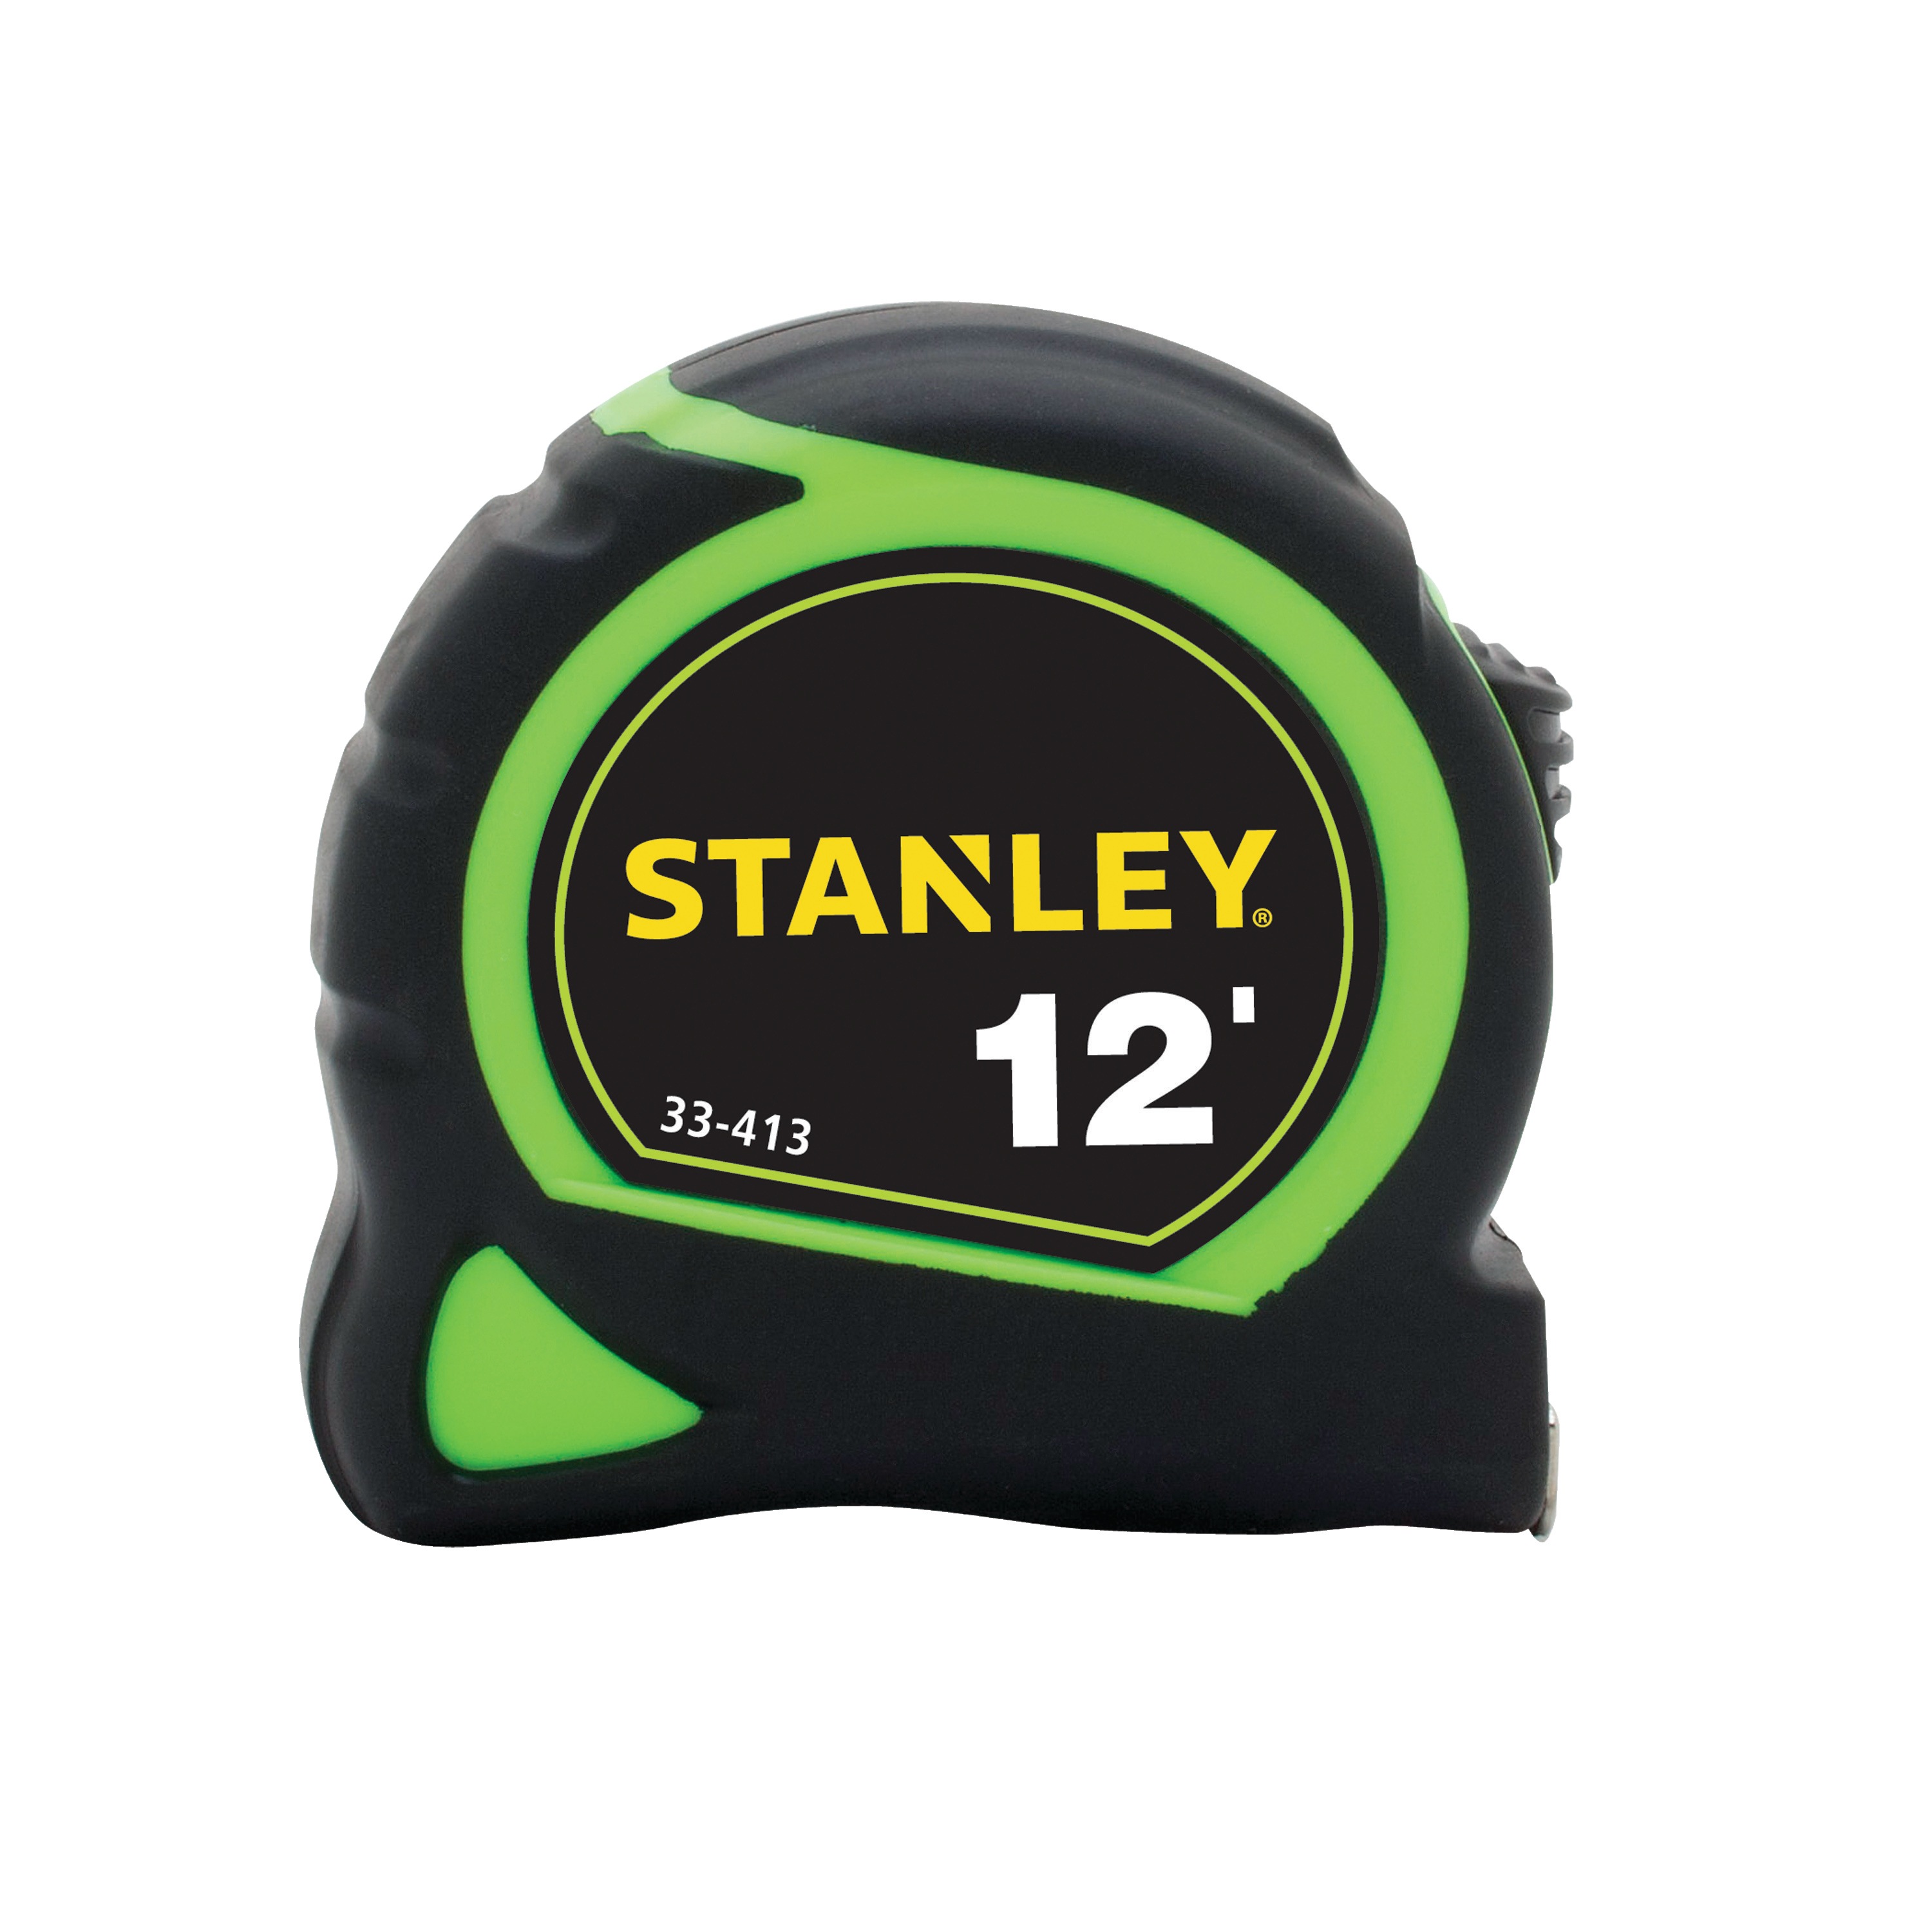 Stanley Tools - 12 ft HighVisibility Tape Measure - 33-413